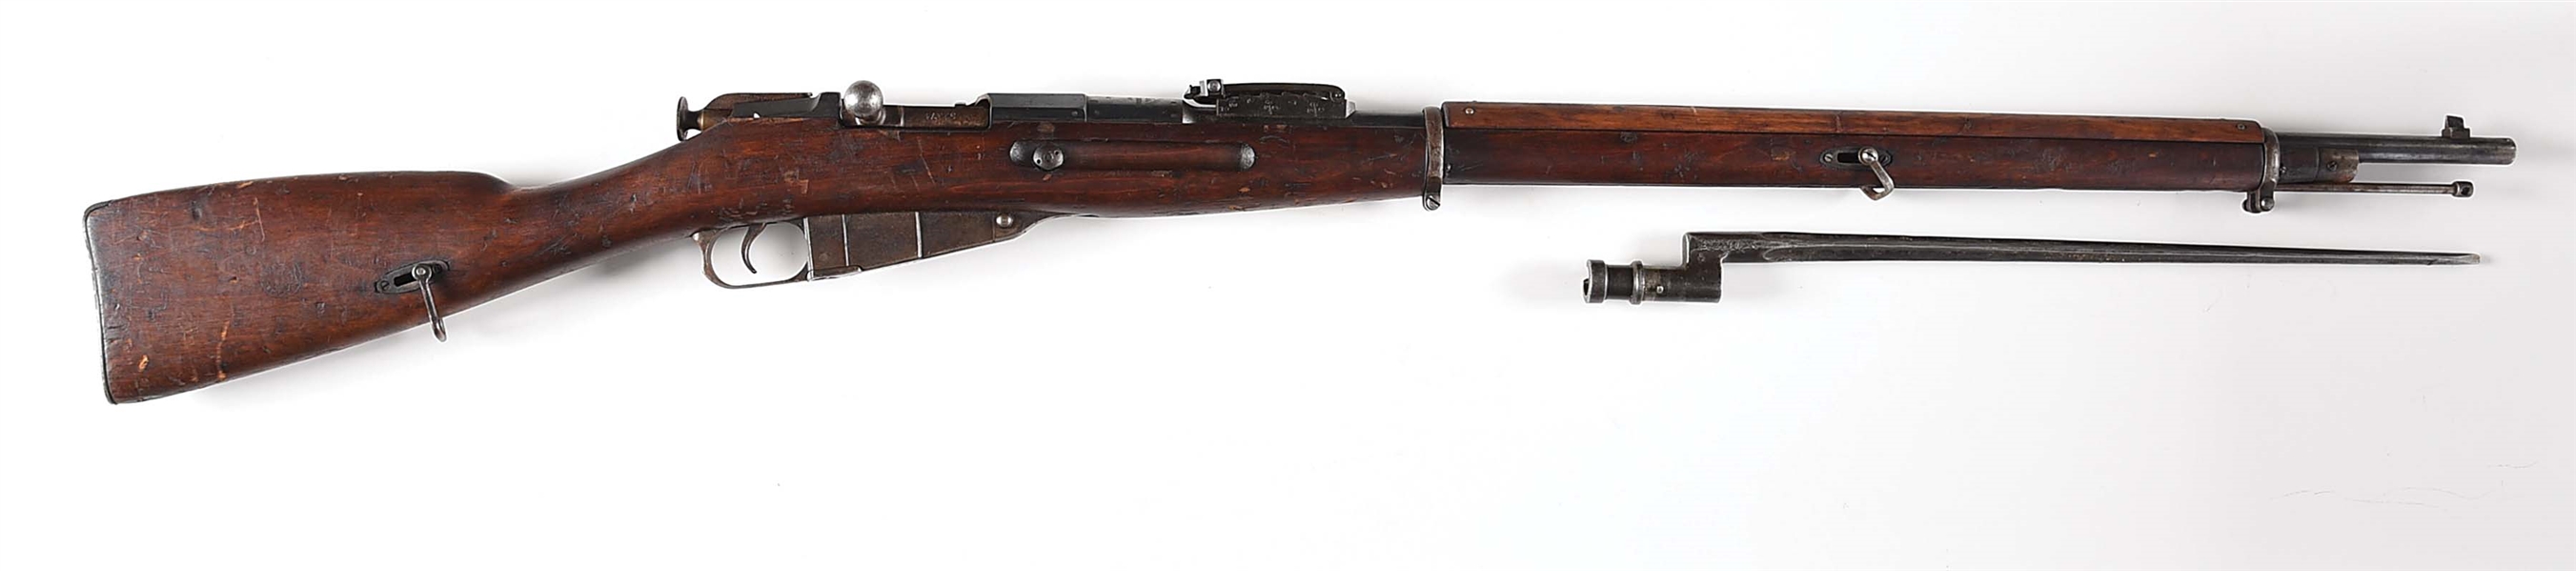 (A) FINNISH CAPTURE IMPERIAL RUSSIAN SESTRORYETSK M91 MOSIN NAGANT BOLT ACTION RIFLE.